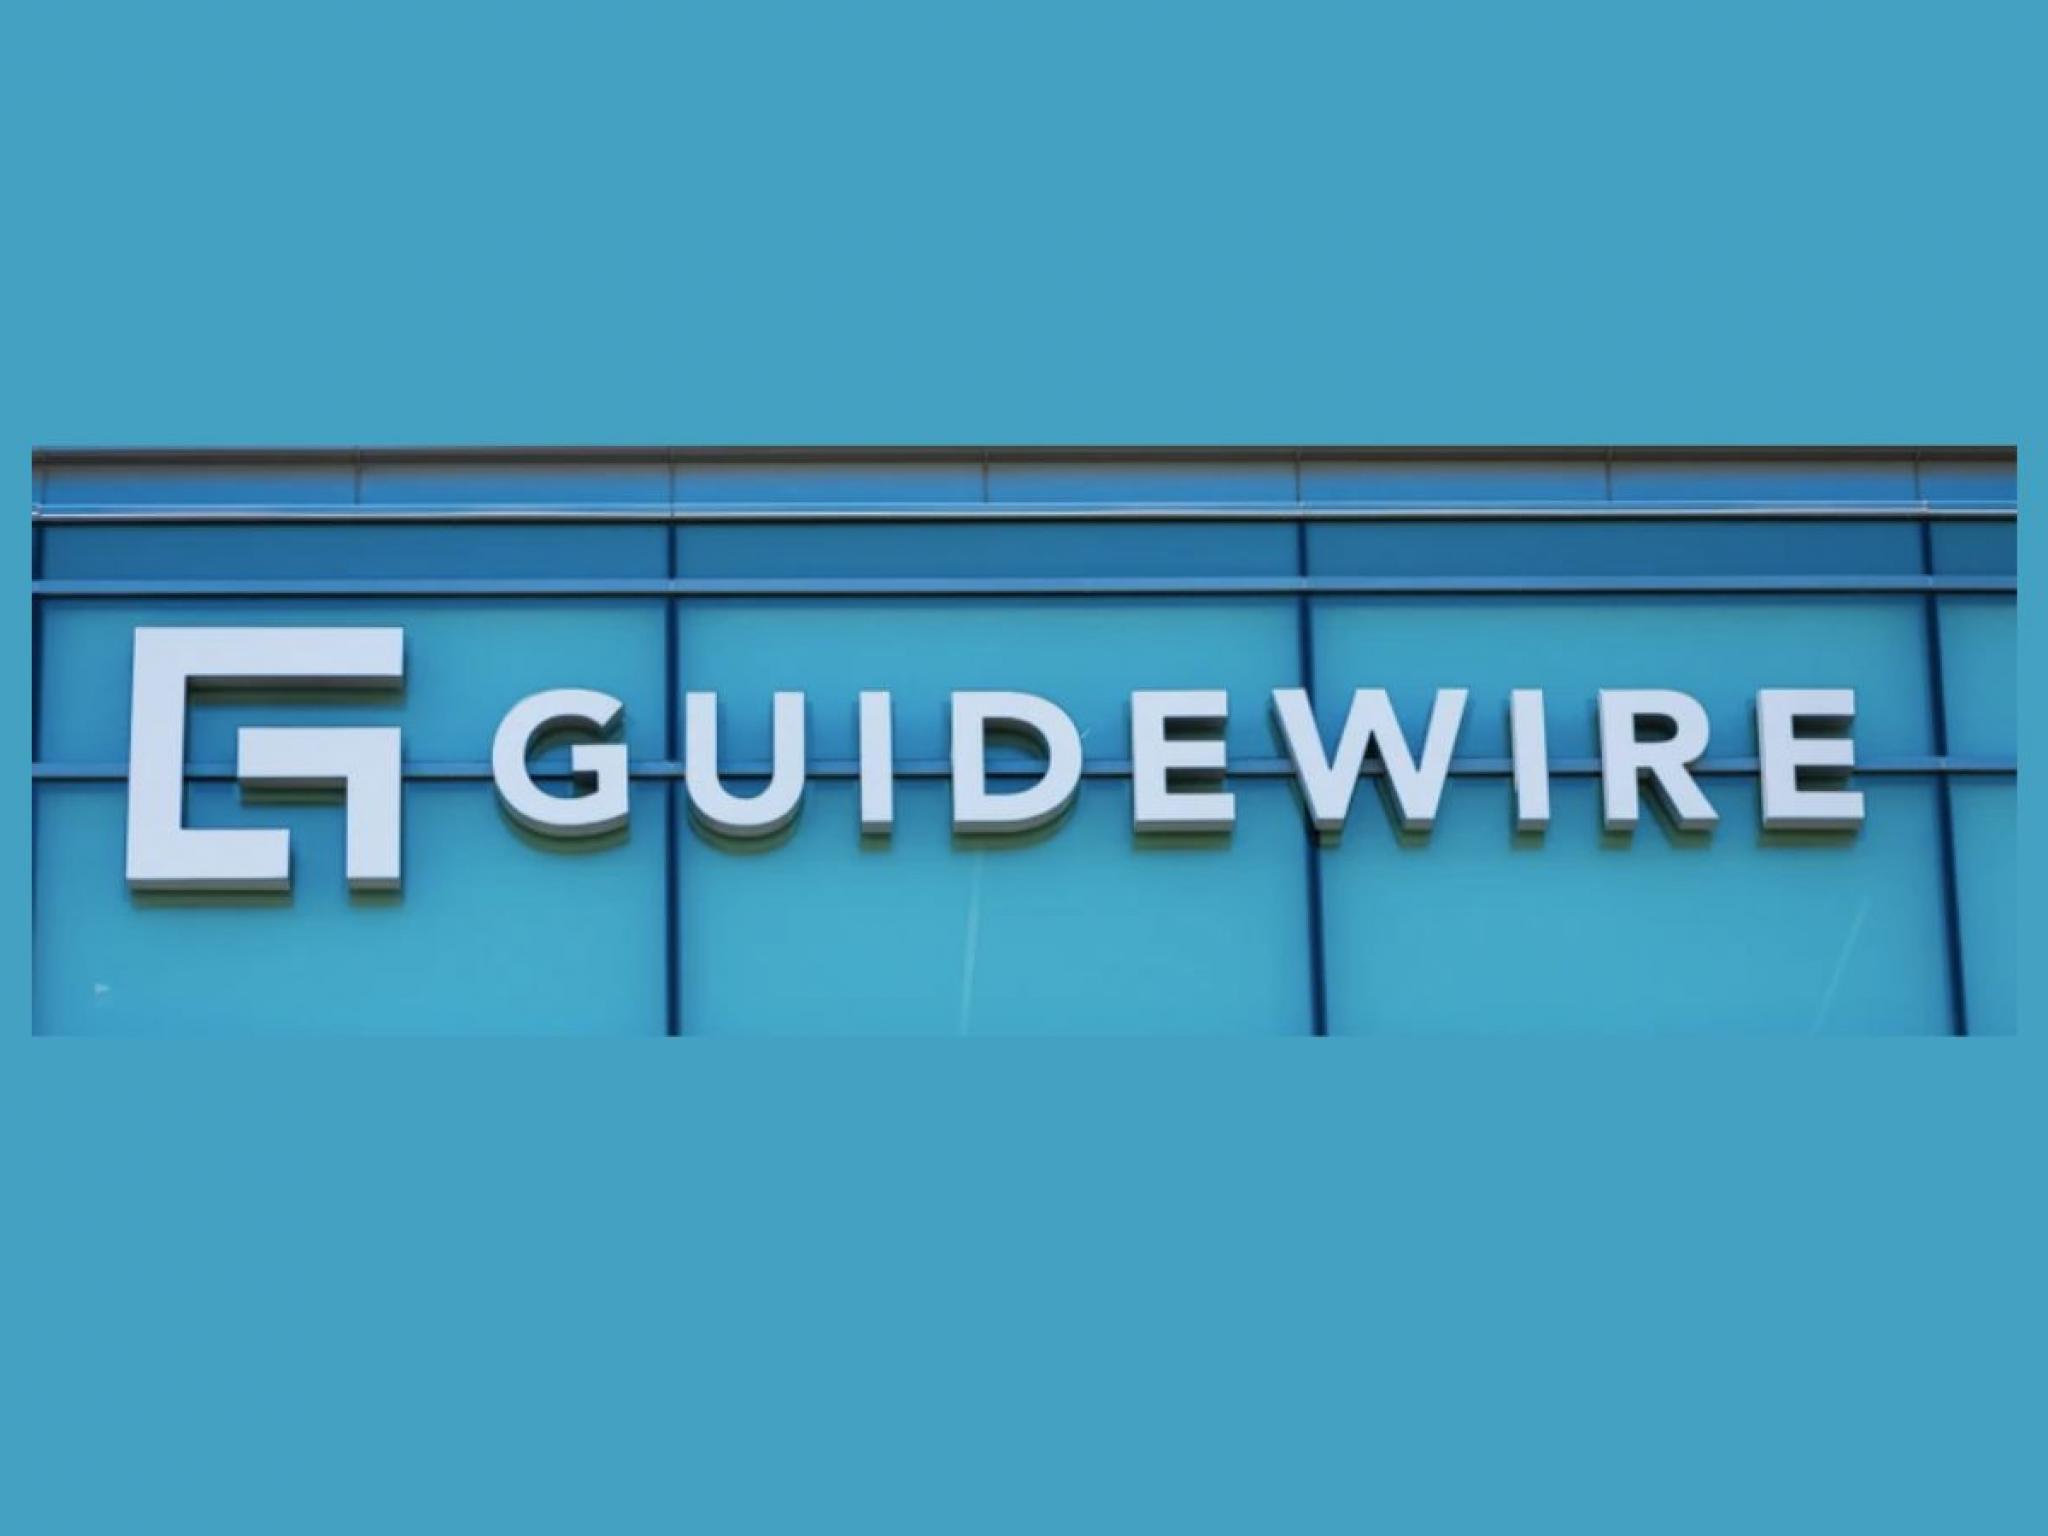  guidewire-software-analysts-increase-their-forecasts-following-q2-results 